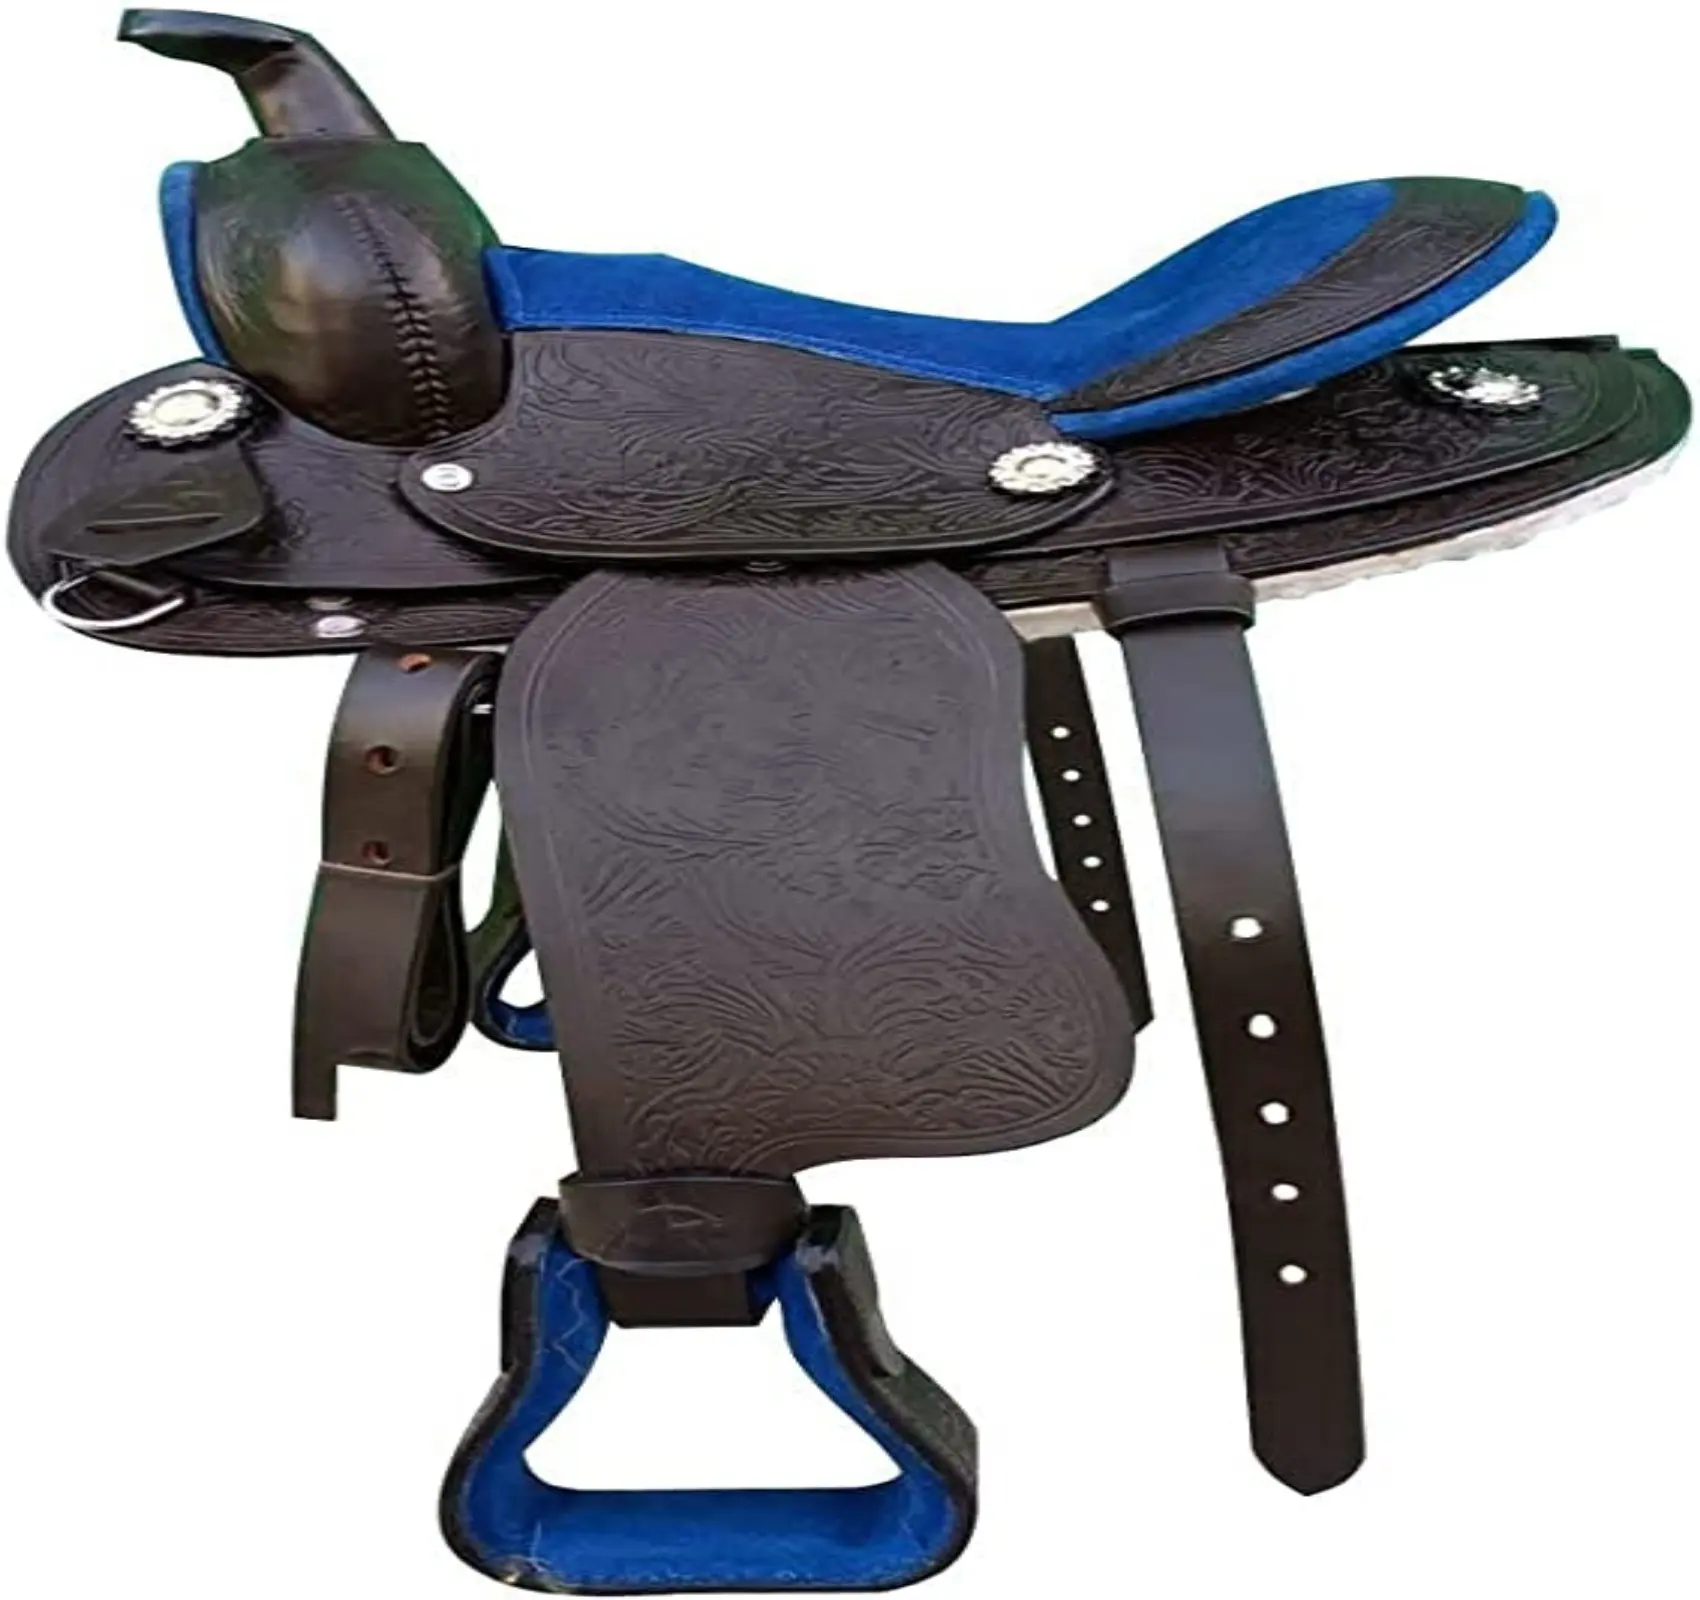 Western Pony Horse Saddle On Fibre Glass Tree For Kids /Western Barrel Horse Saddle /Racing Saddle Available Size In 11",12",13"